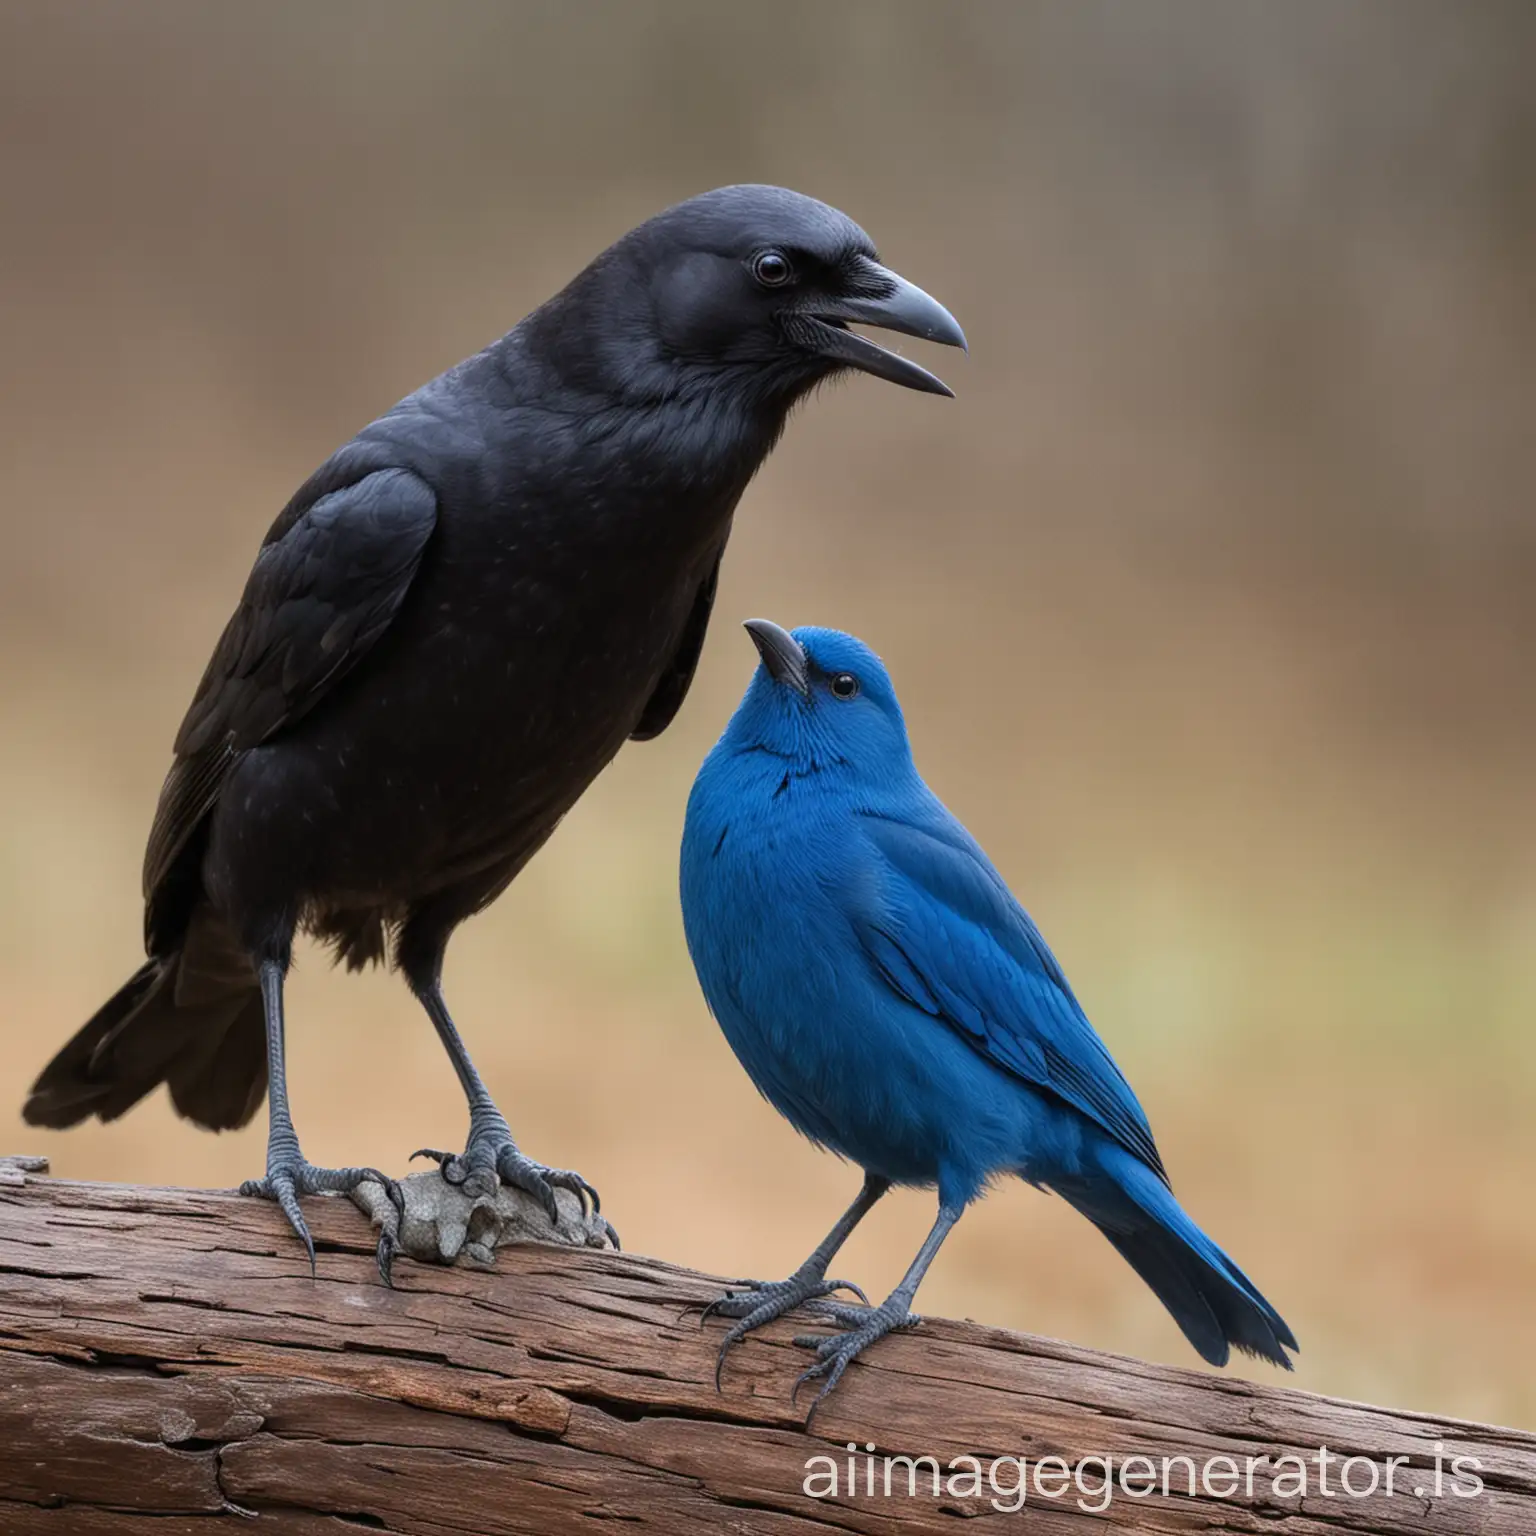 a crow and a blue bird that are friends, looking cute and goofy